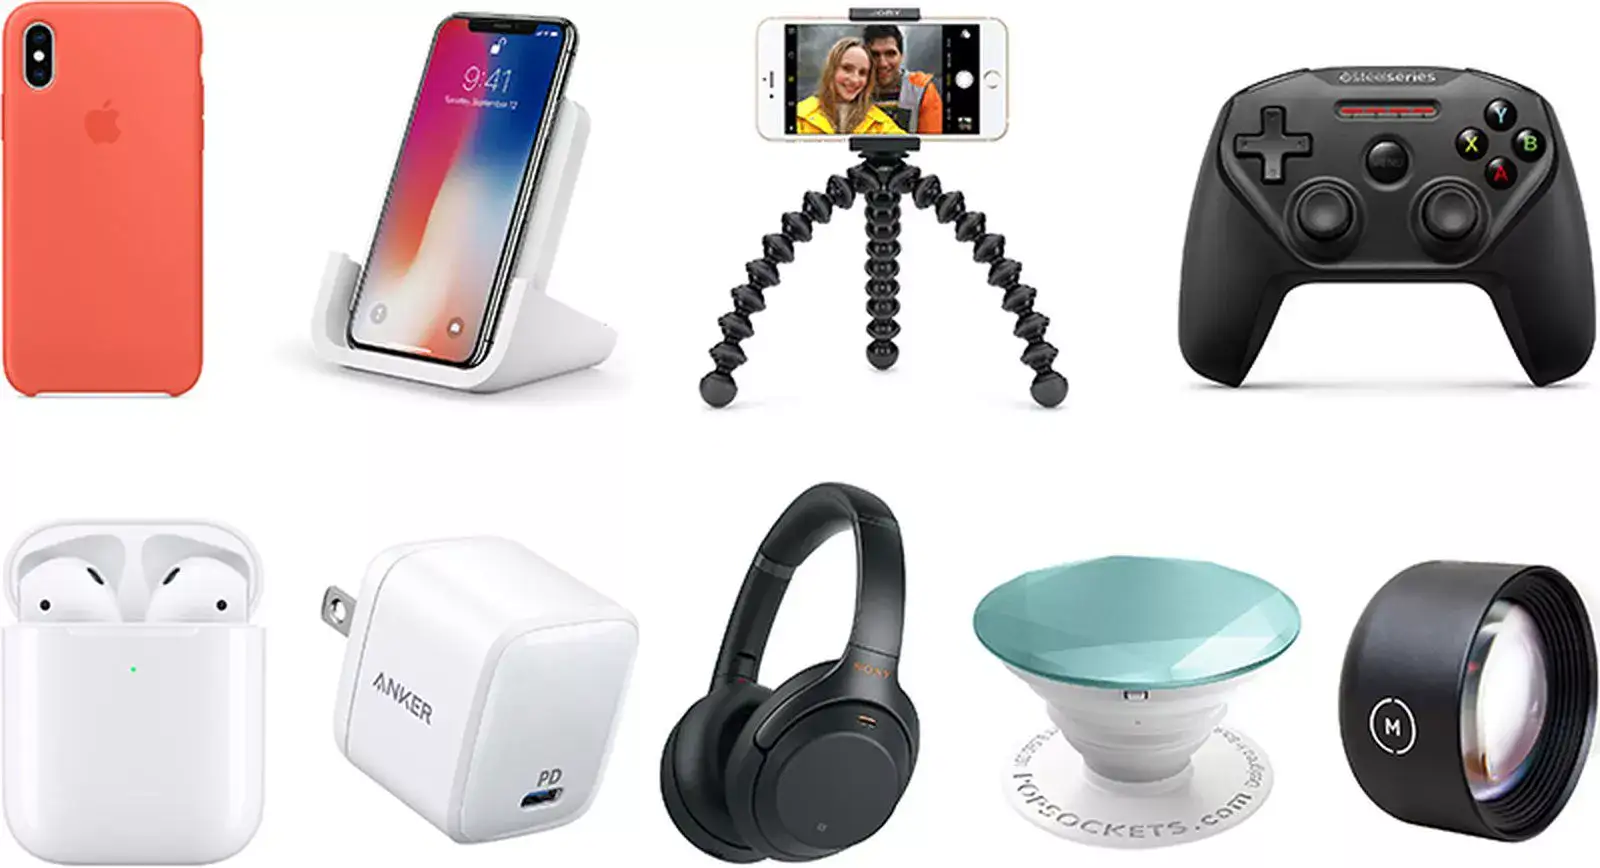 Alternatives for iPhone Accessories